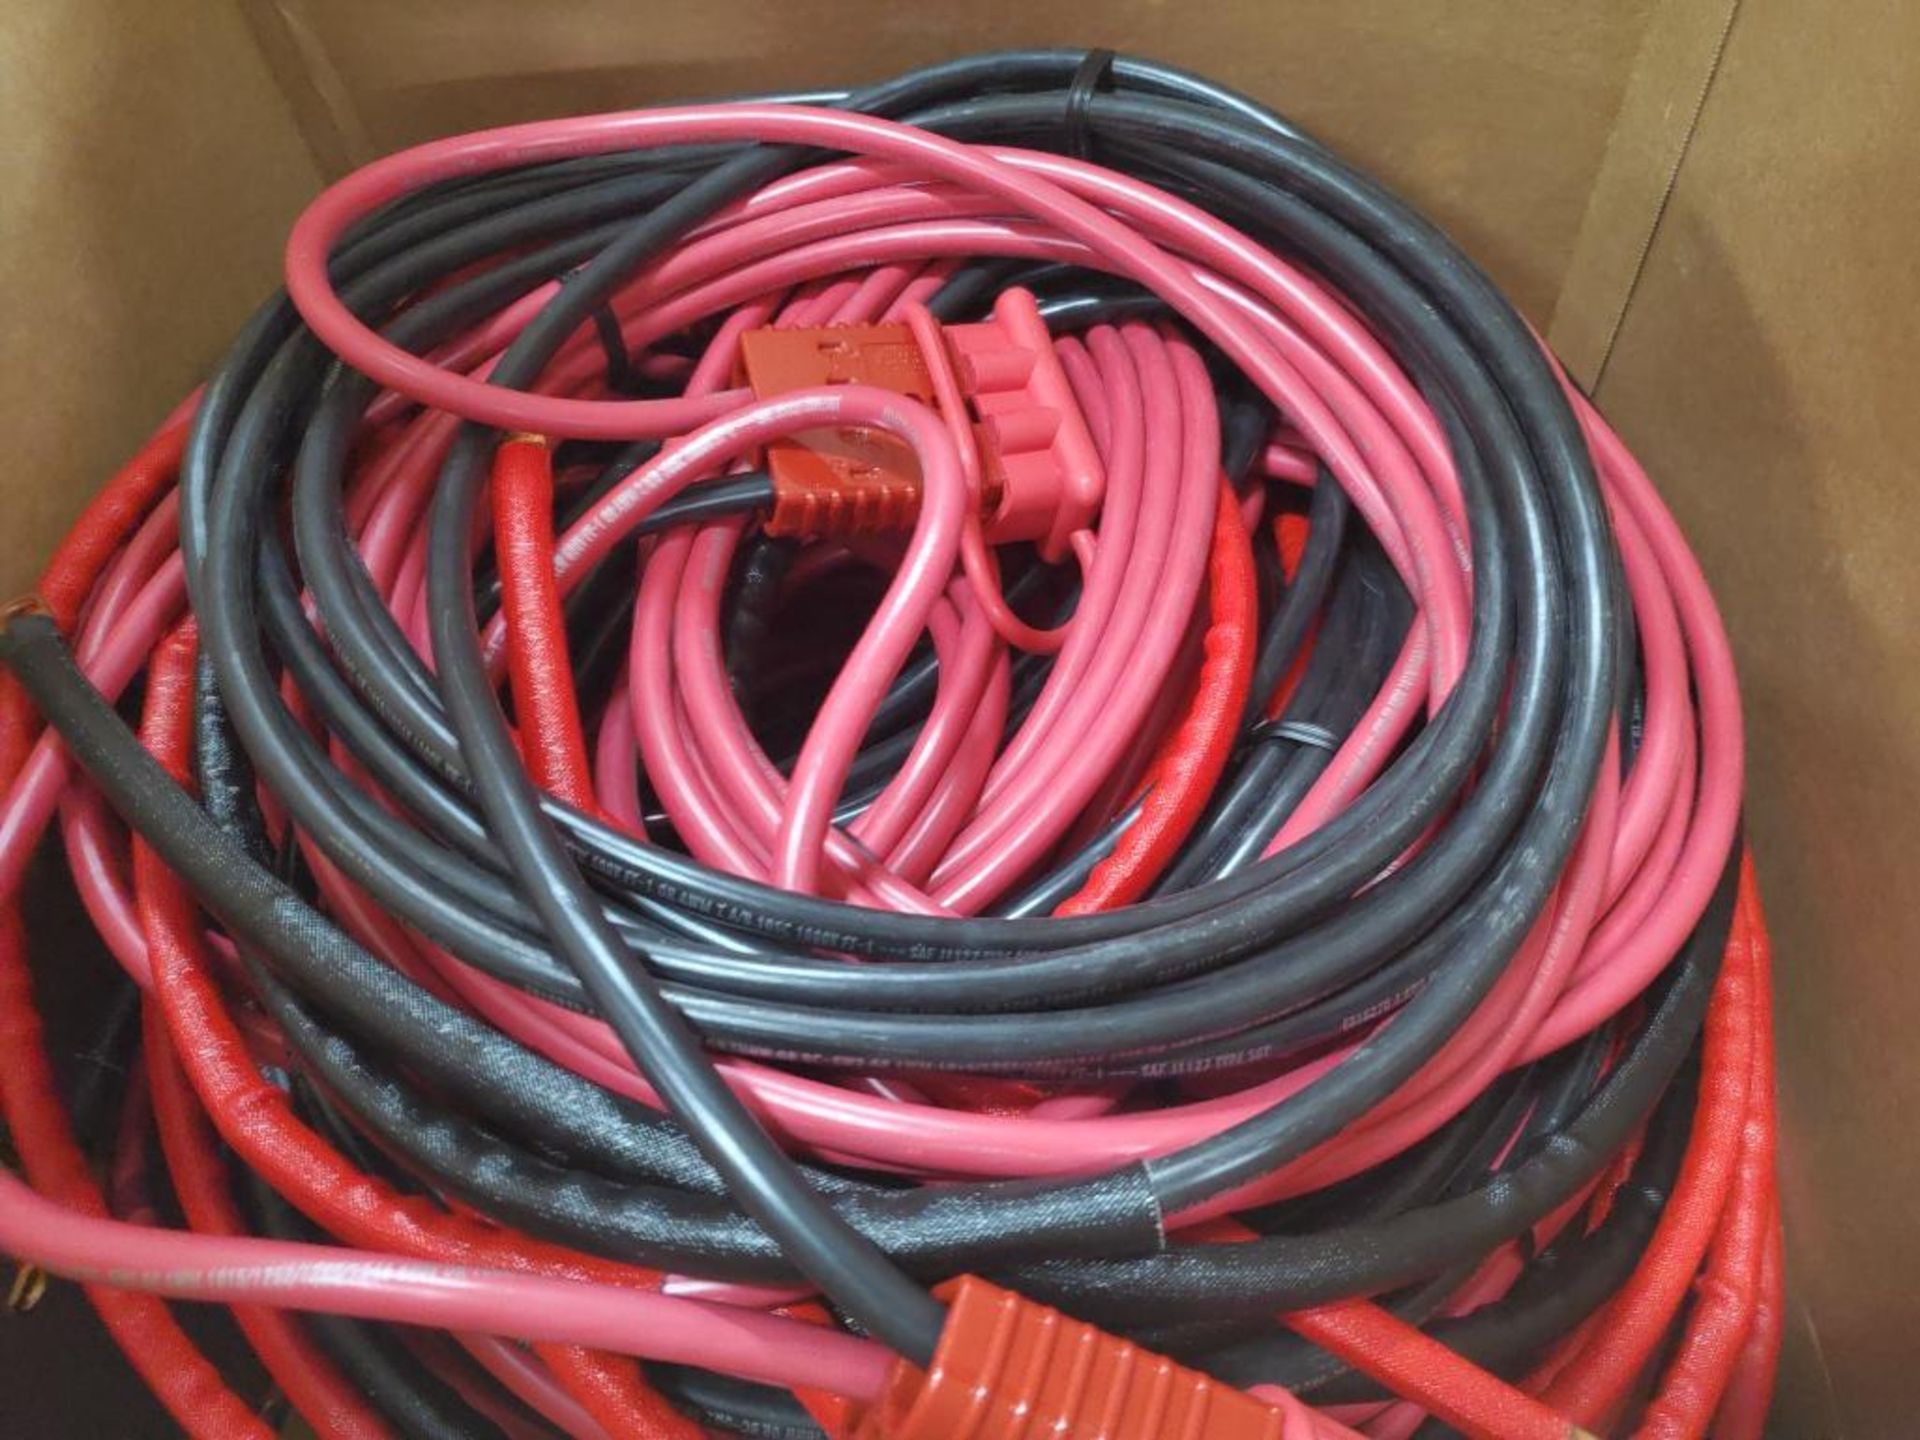 Qty 14 - Anderson 23ft battery adapter cable. RBARA23FT4-G1. 175A, 600V plug. New in box. - Image 5 of 9